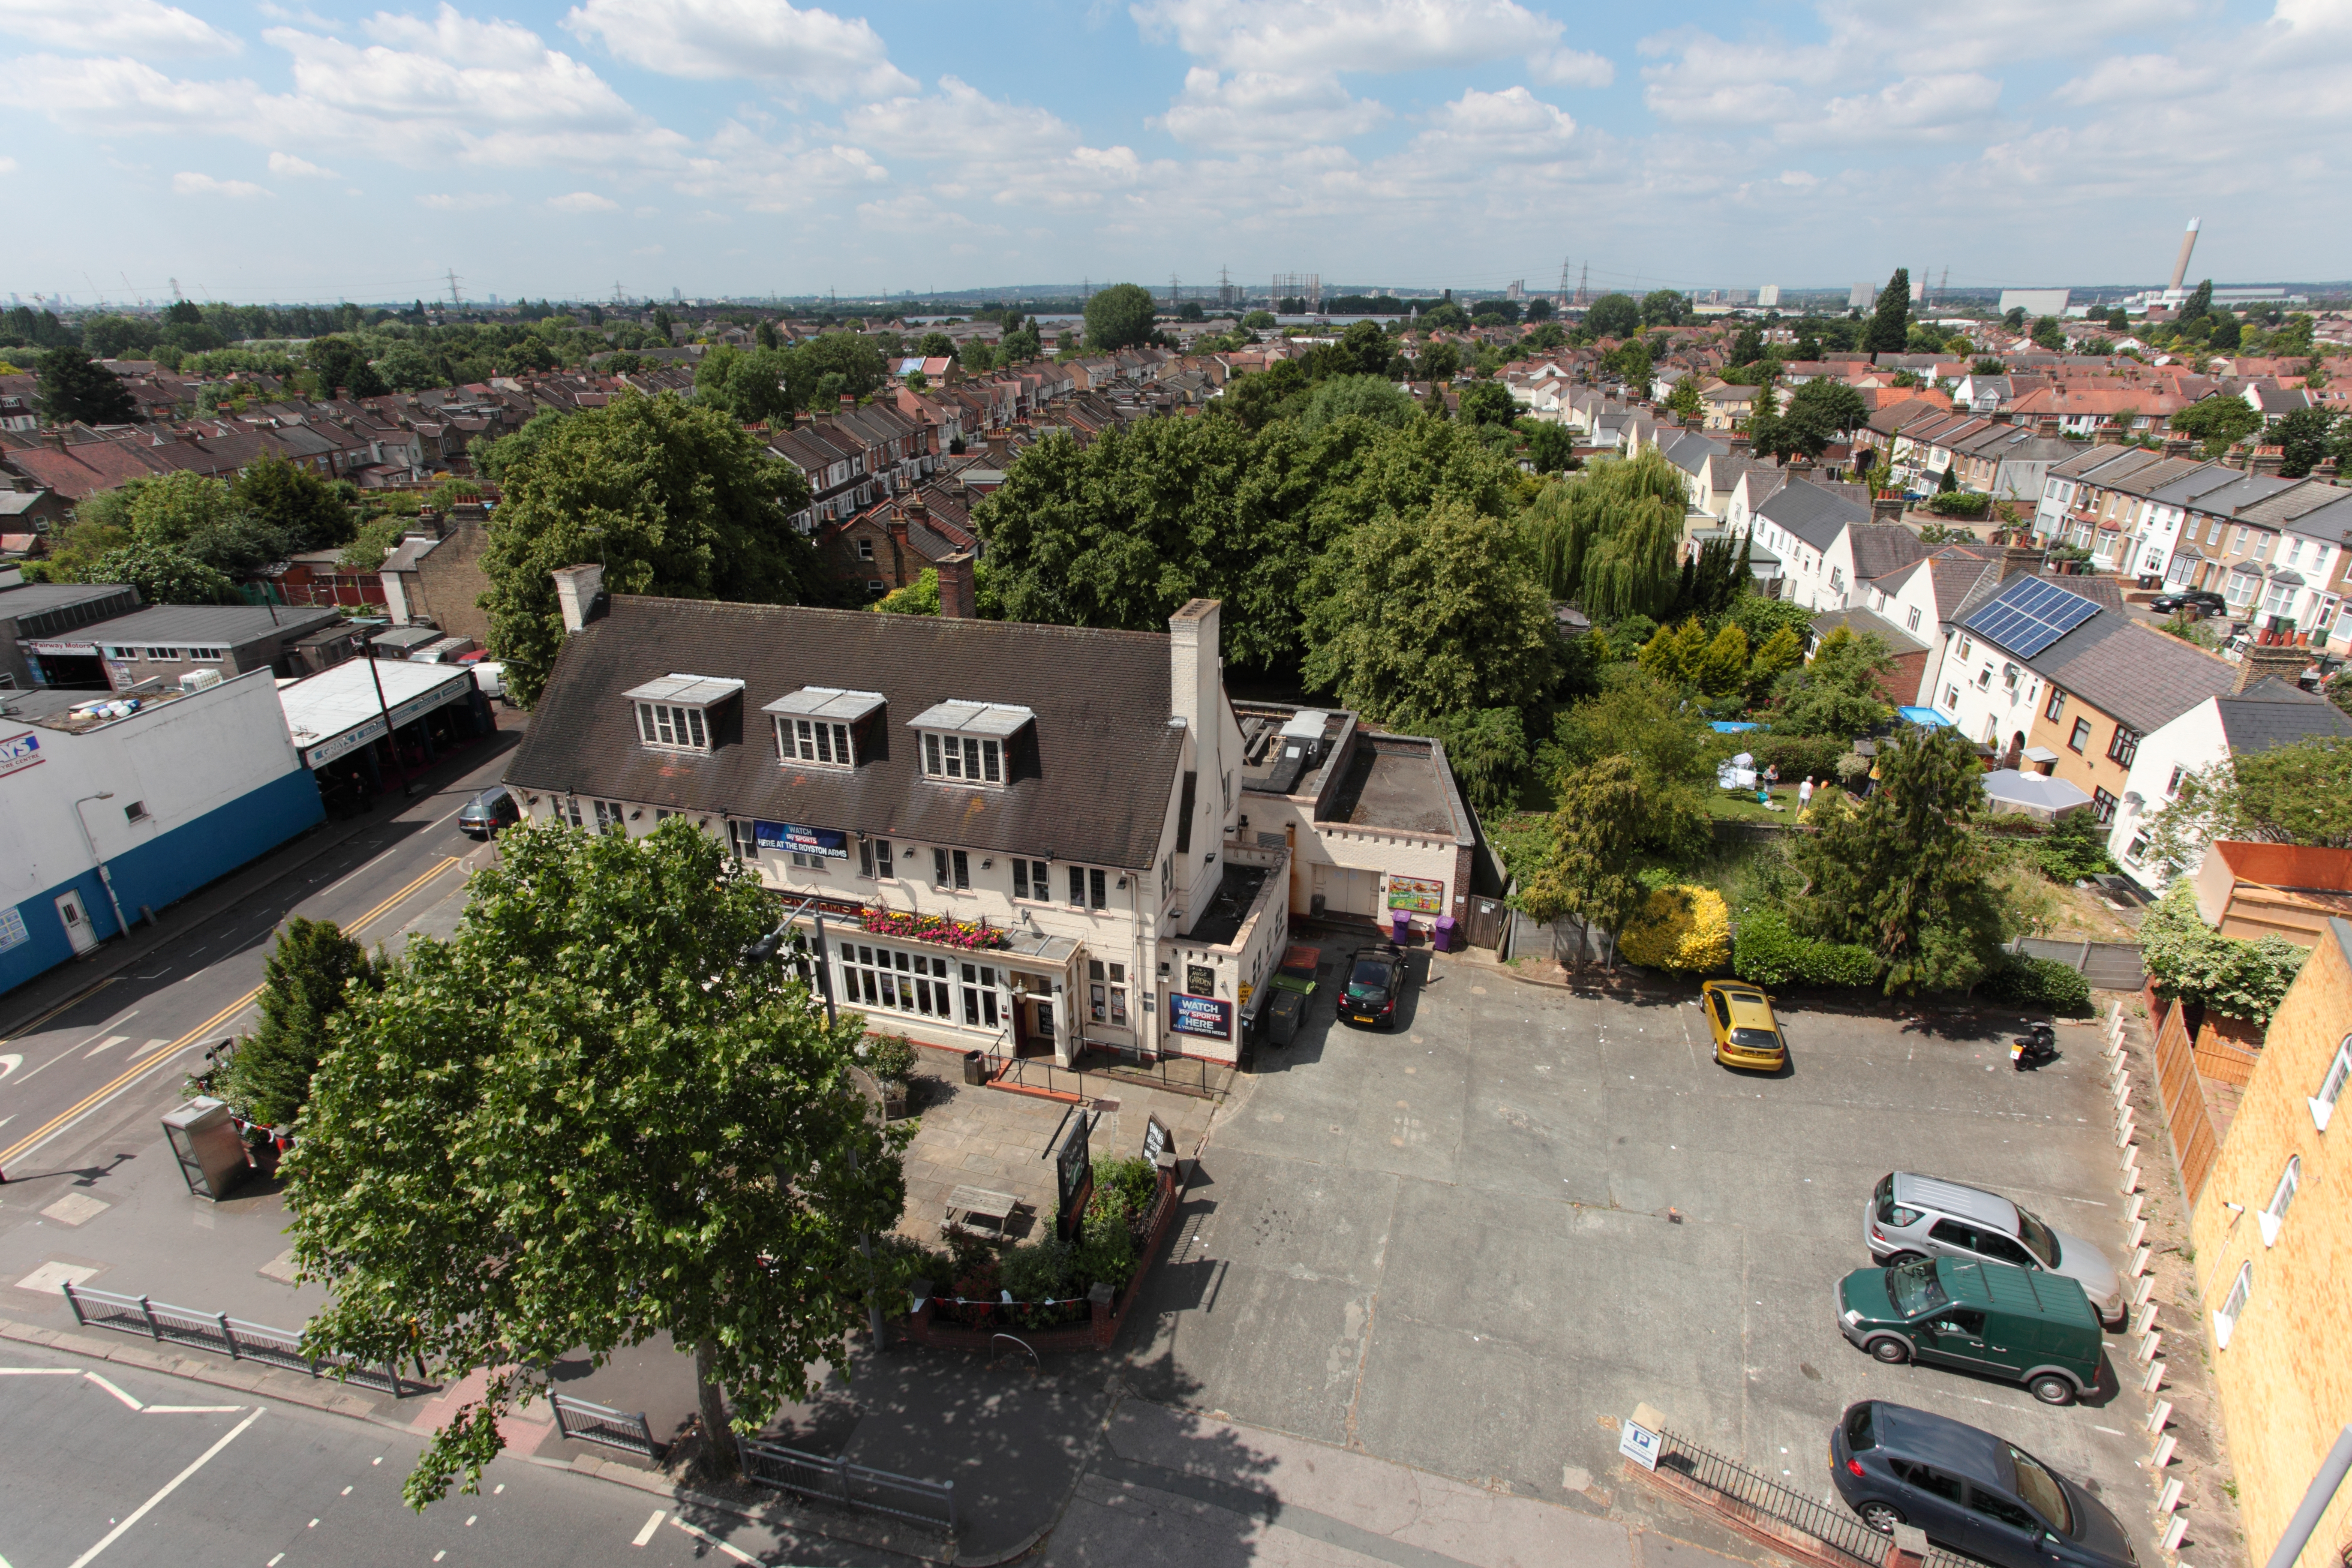 Chingford Mount Road – Substantial public house in E4, with development potential. Purchased unconditionally by Landhold.